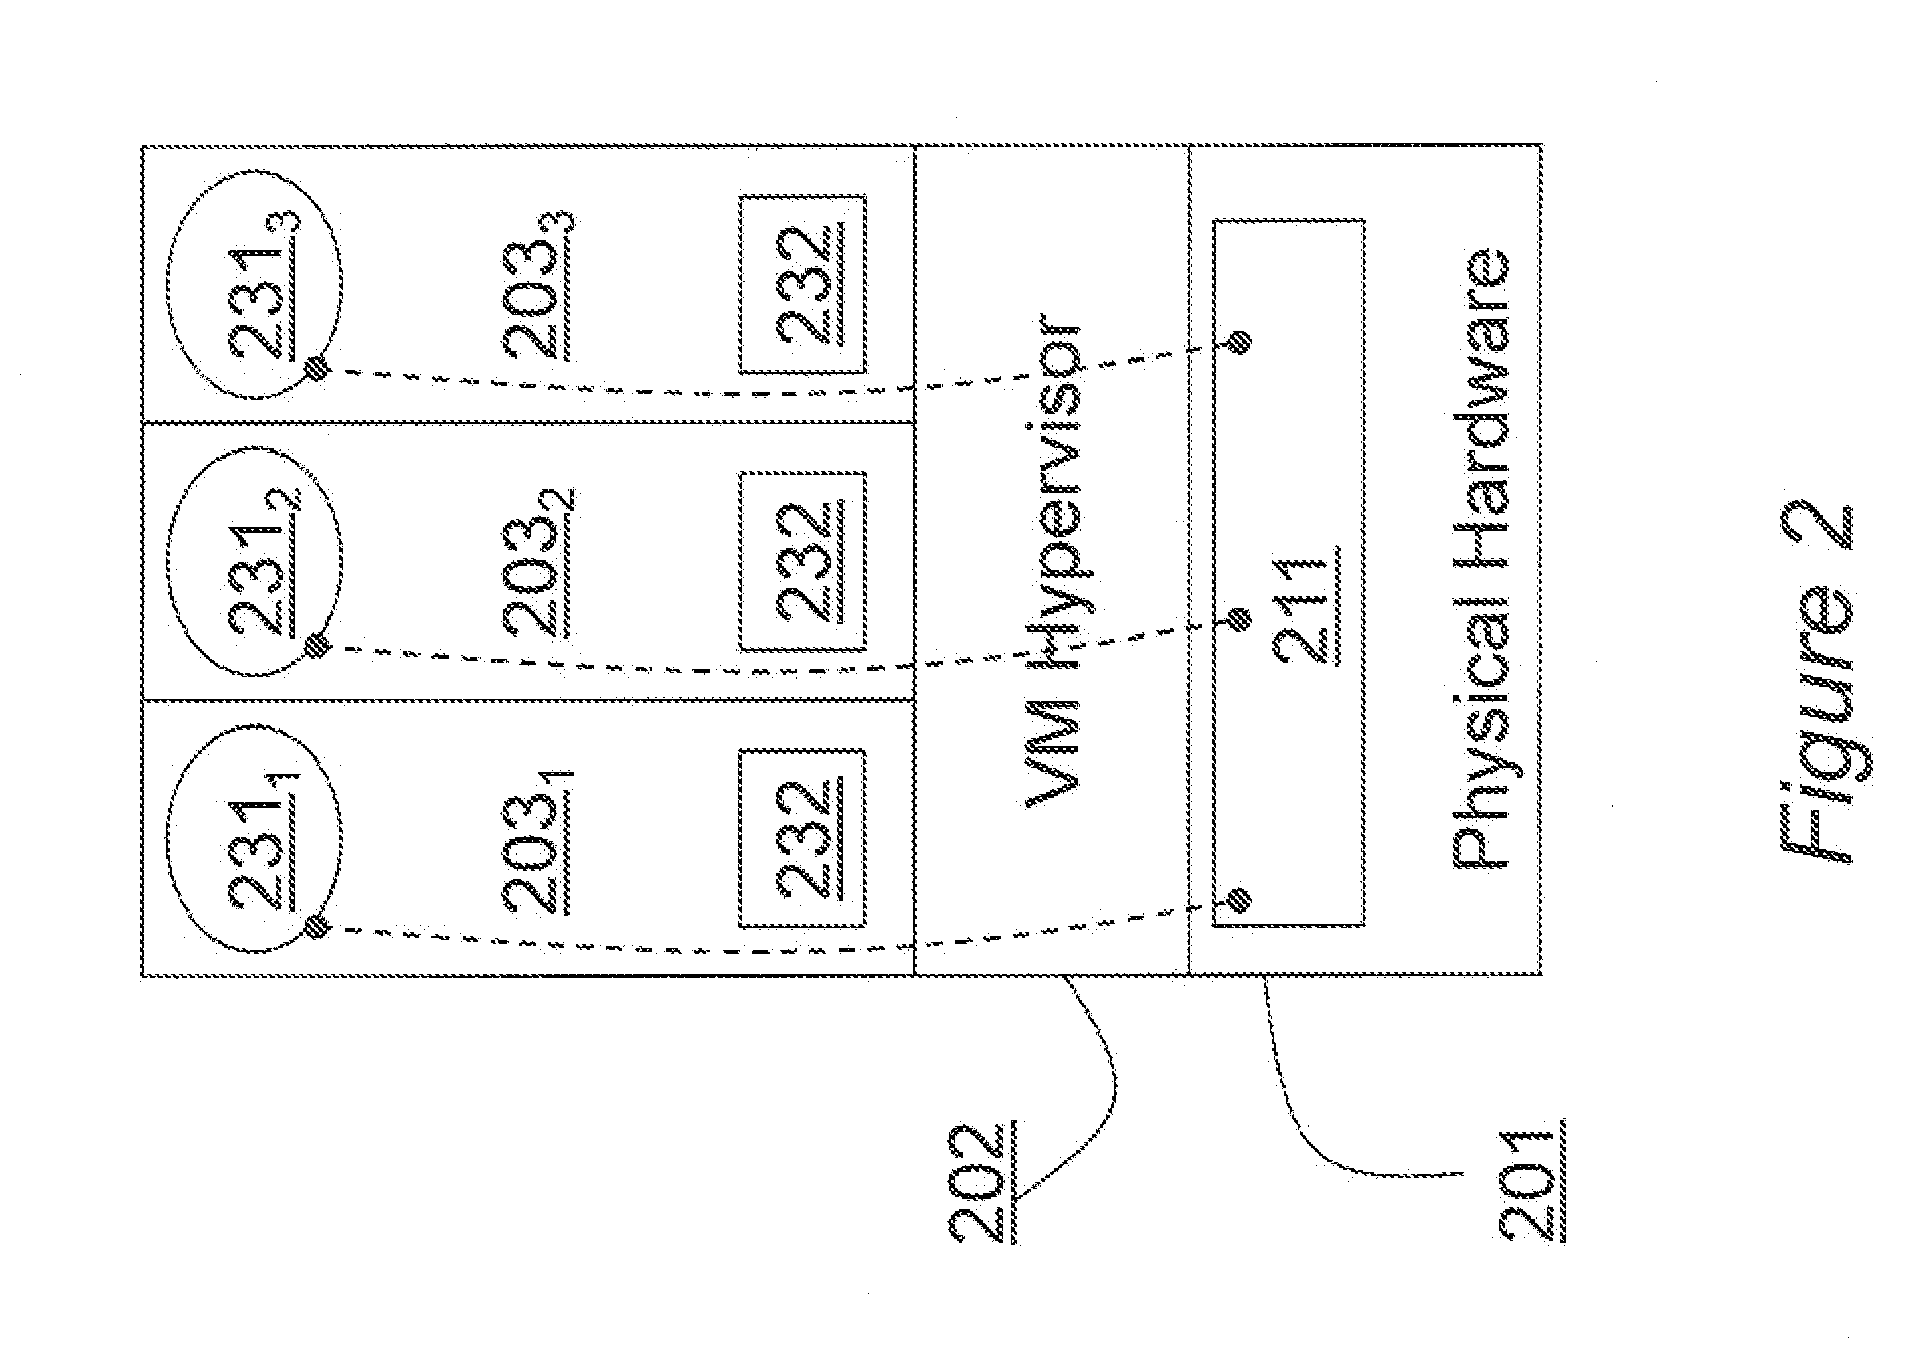 Method and System for Software Licensing Under Machine Virtualization